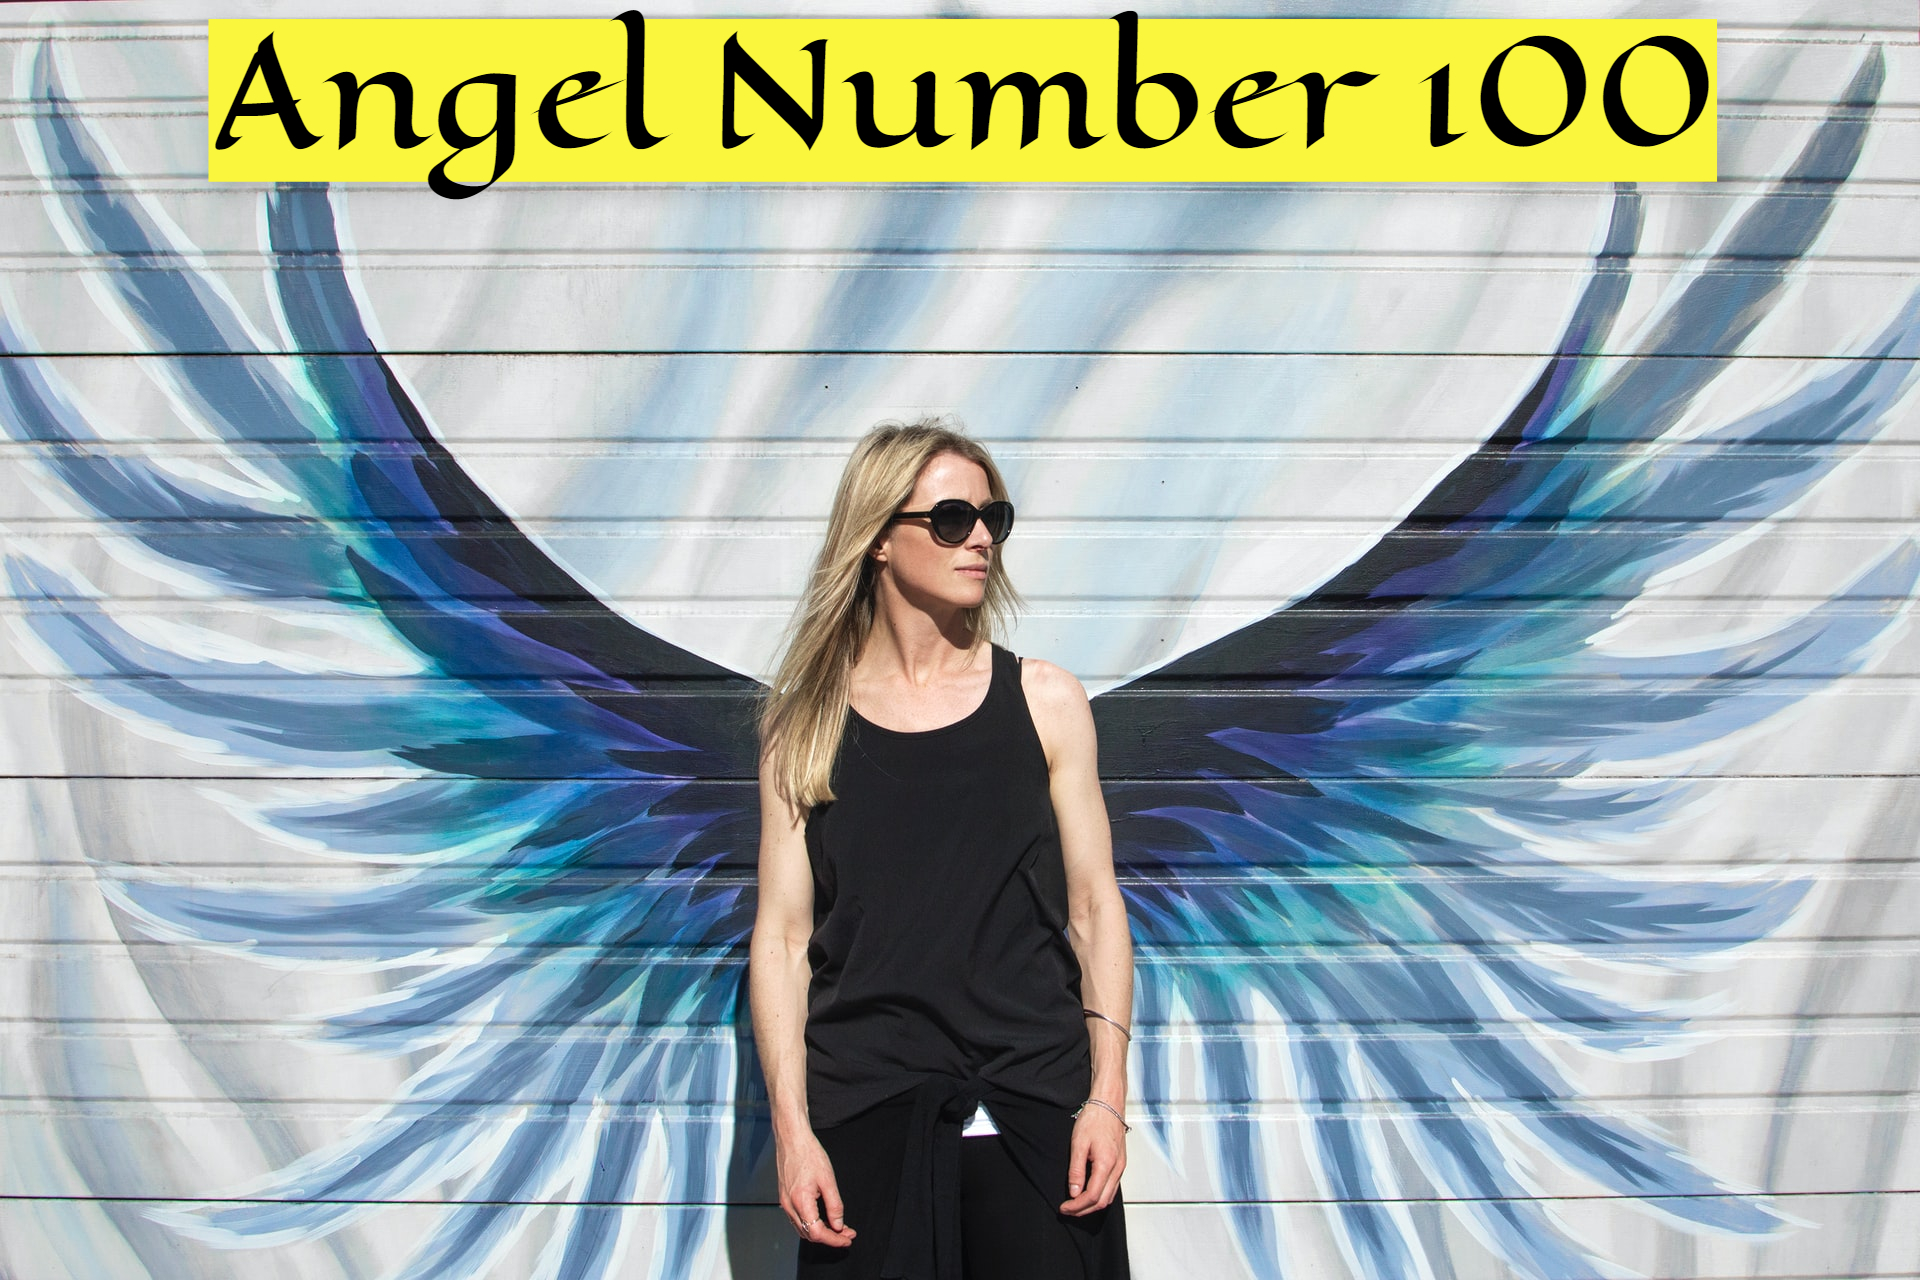 Angel Number 100 Provides Divine Guidance Through Your Intuition